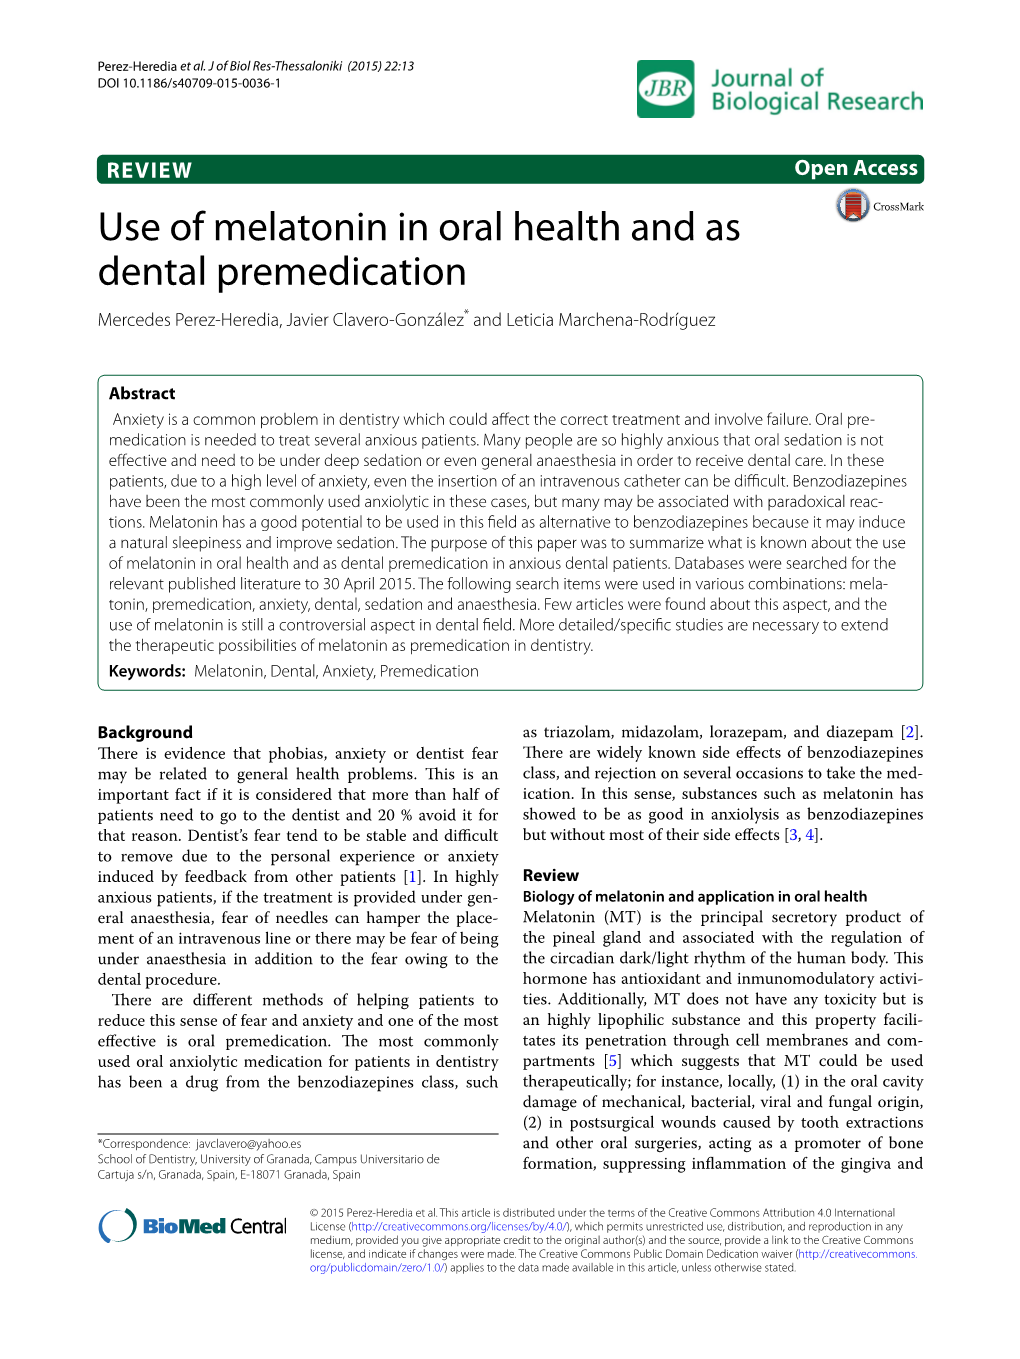 Use of Melatonin in Oral Health and As Dental Premedication Mercedes Perez‑Heredia, Javier Clavero‑González* and Leticia Marchena‑Rodríguez